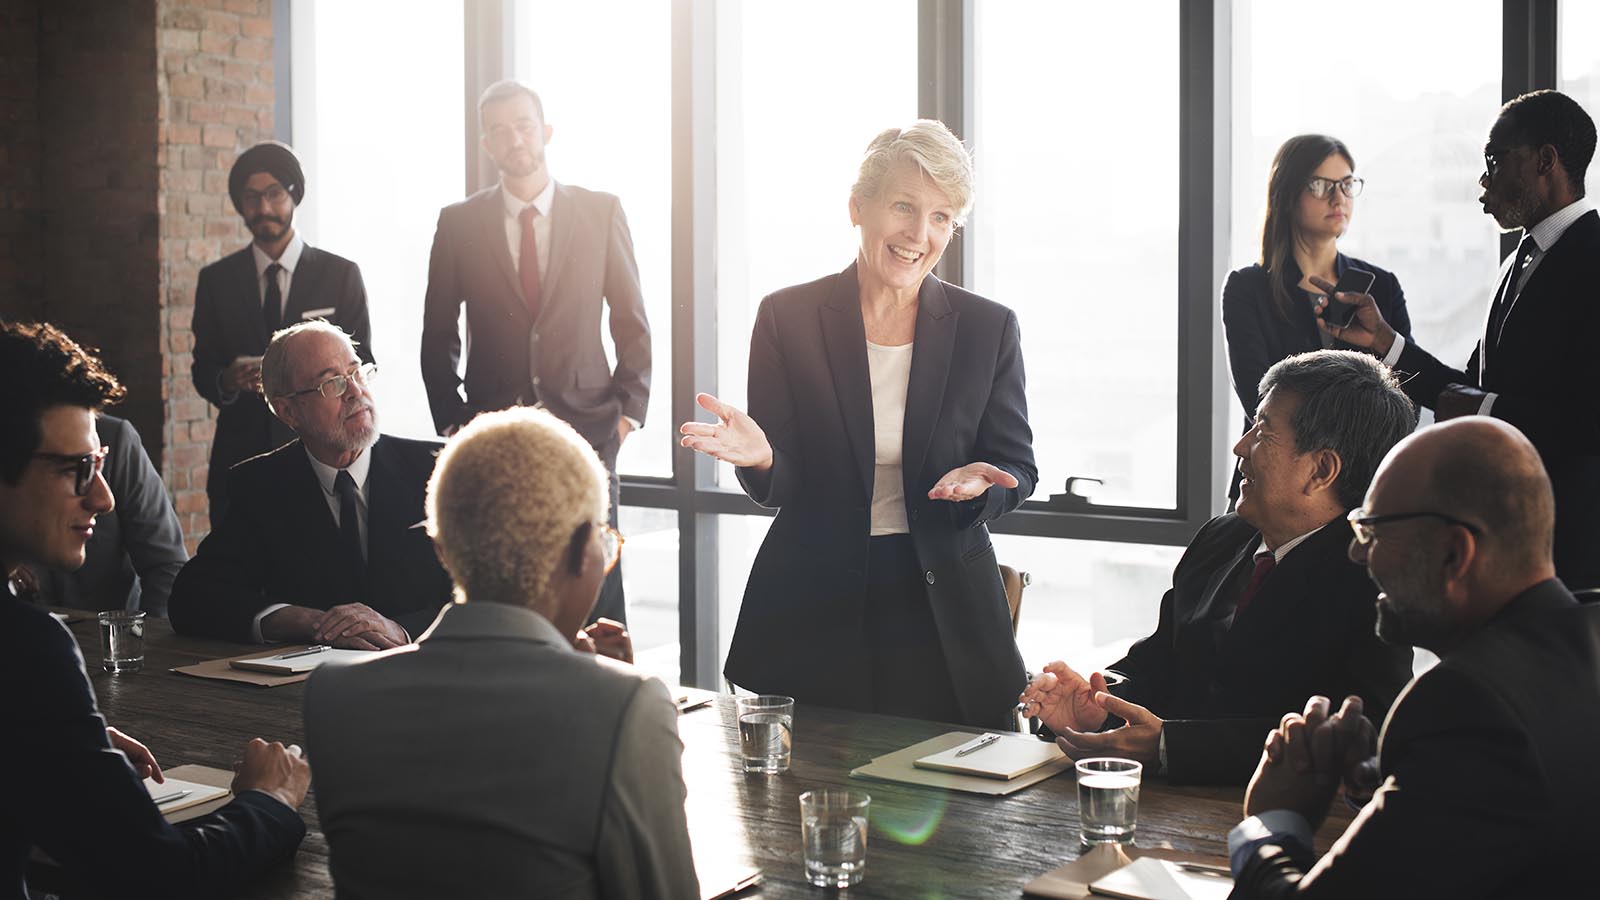 Image of a group of business individuals talking to one another standing up.